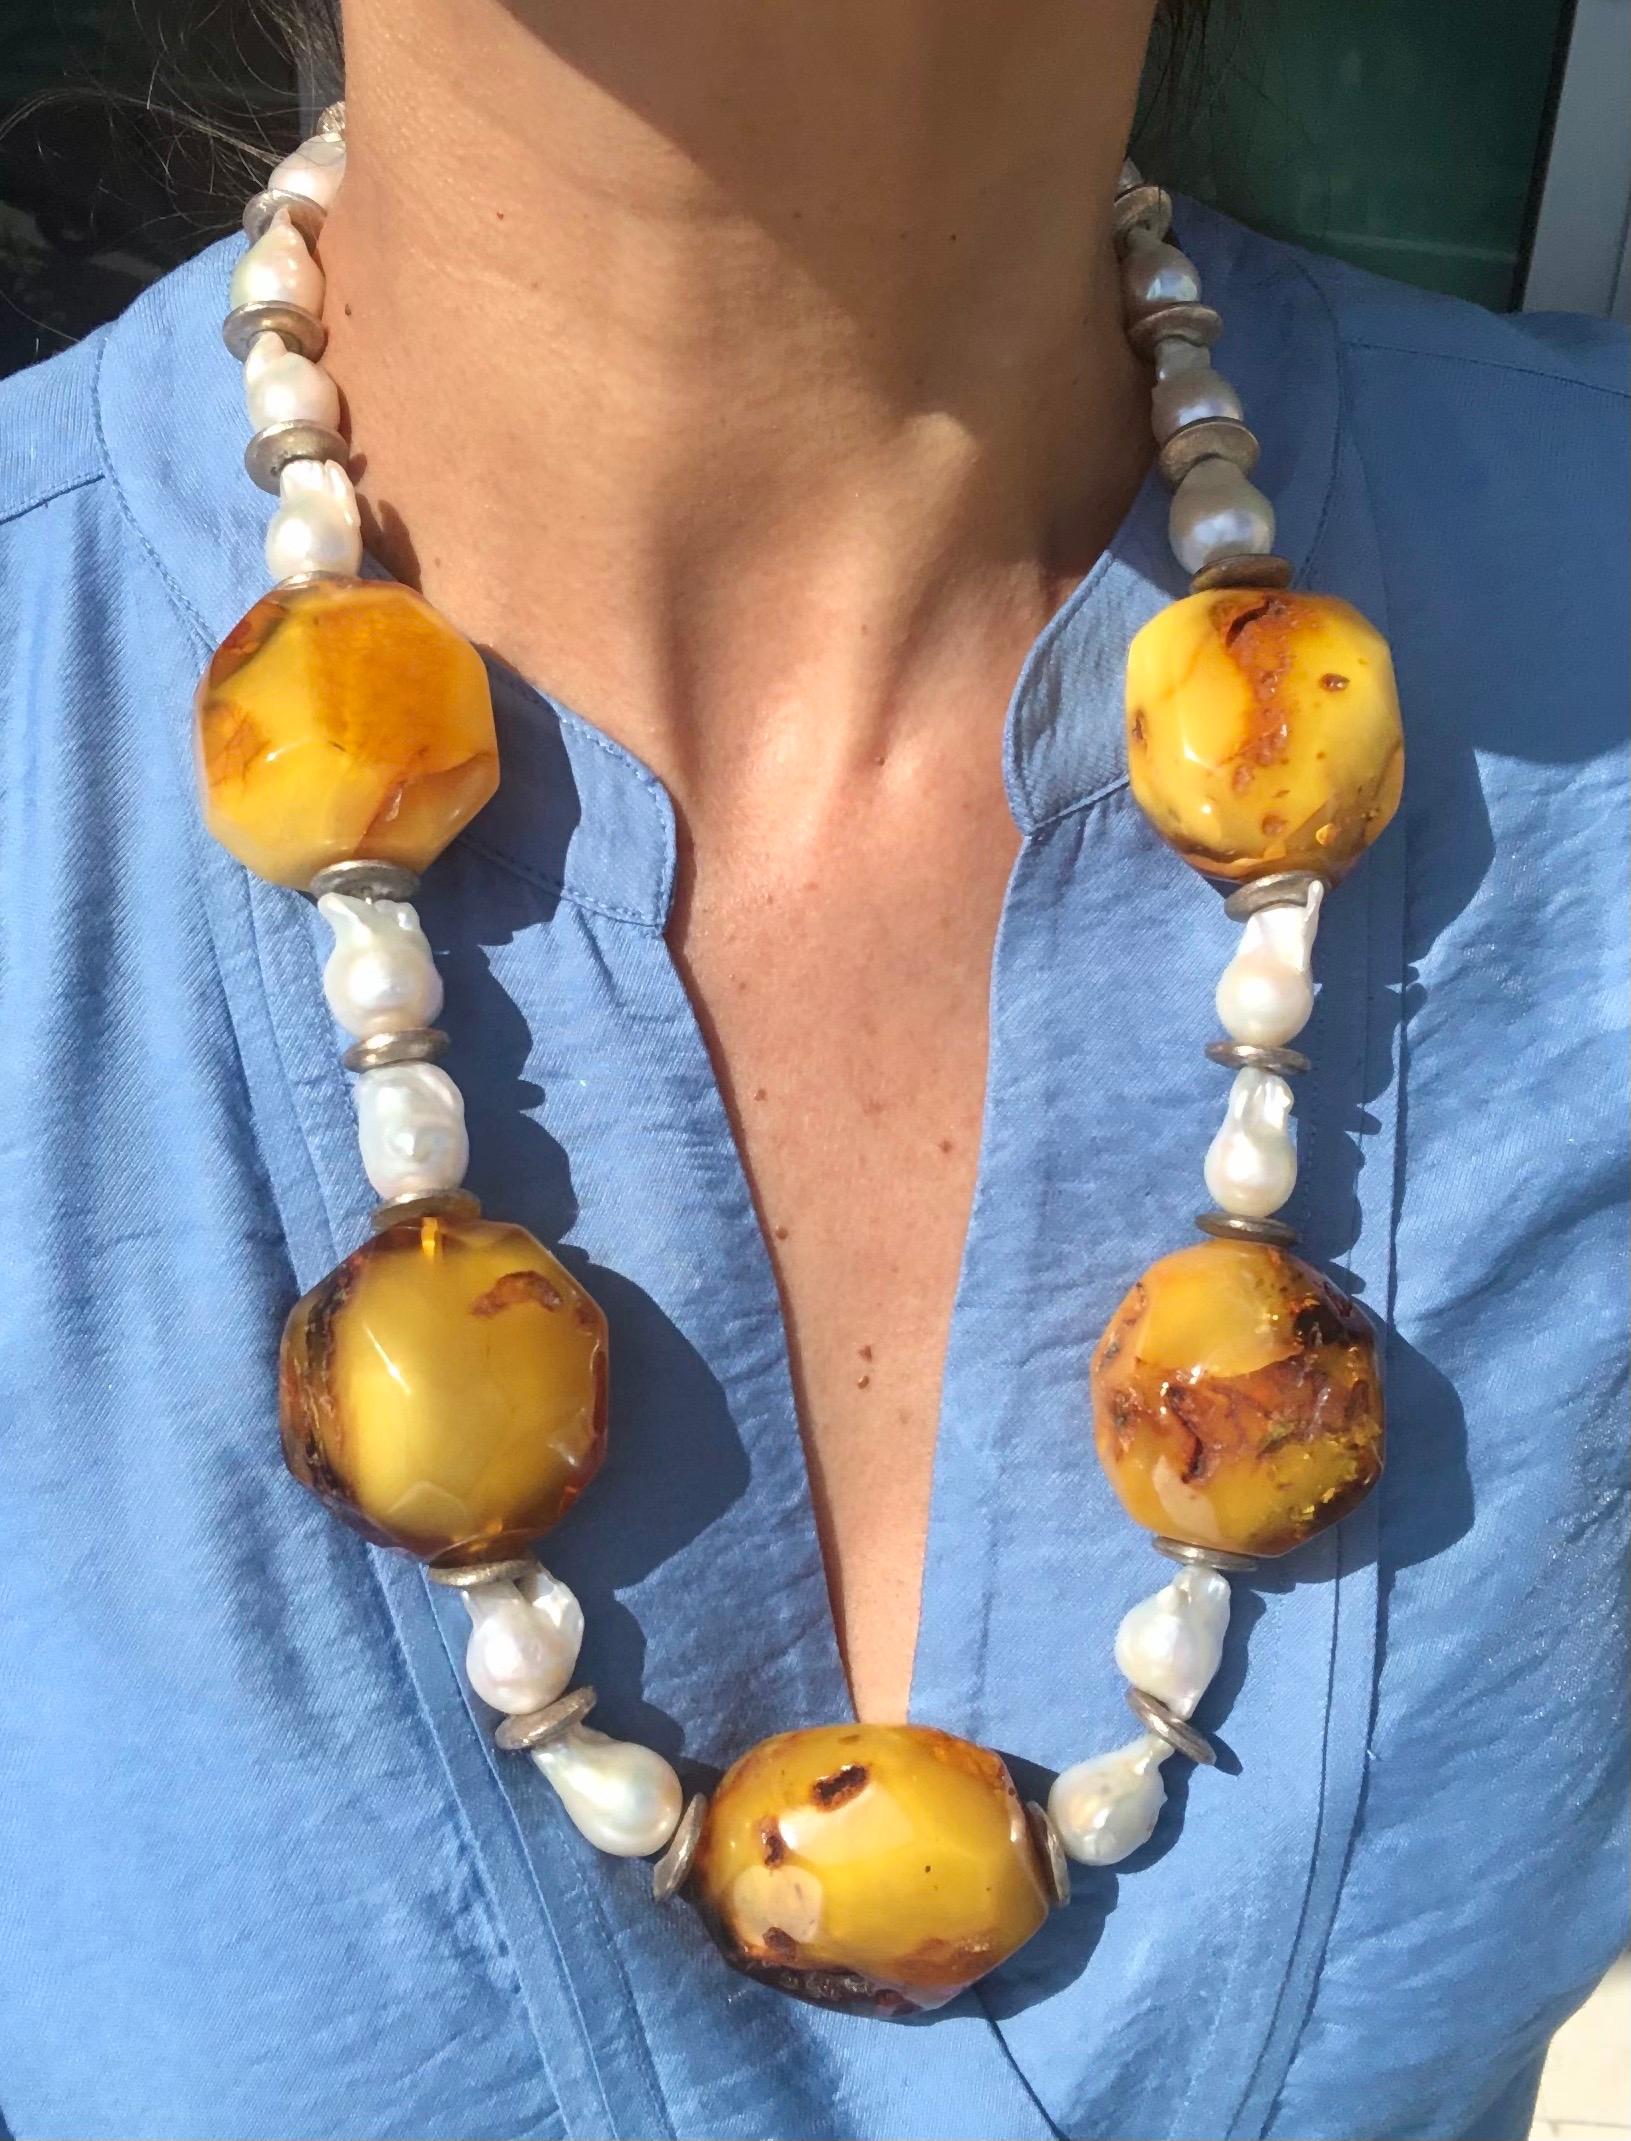 One-of-a-Kind

Introducing a stunning piece of jewelry that combines two unique and captivating materials - a big and bold necklace featuring Amber and Baroque Pearls.

While Amber is not technically a gemstone, it is a fossilized tree resin that